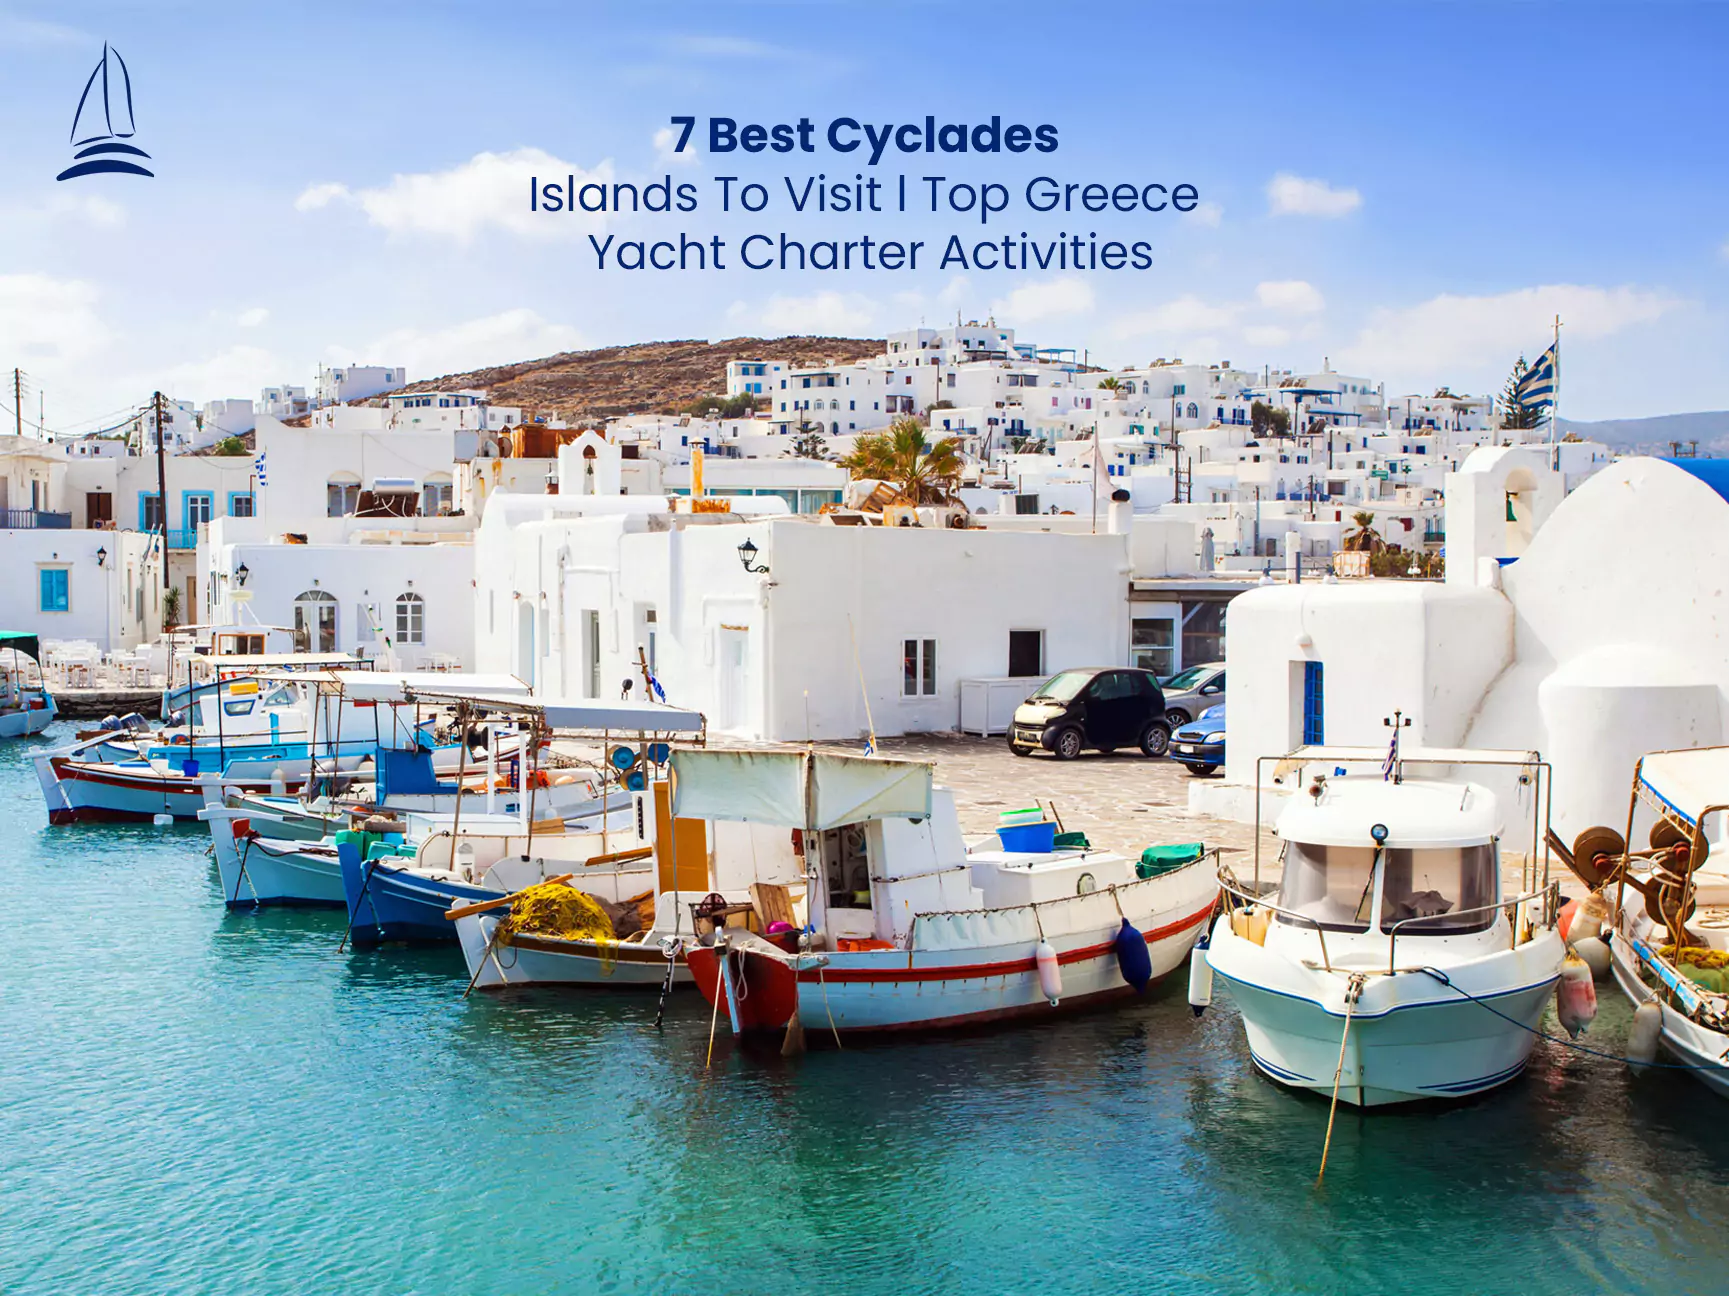 7 Best Cyclades Islands to Visit l Top Greece Yacht Charter Activities img